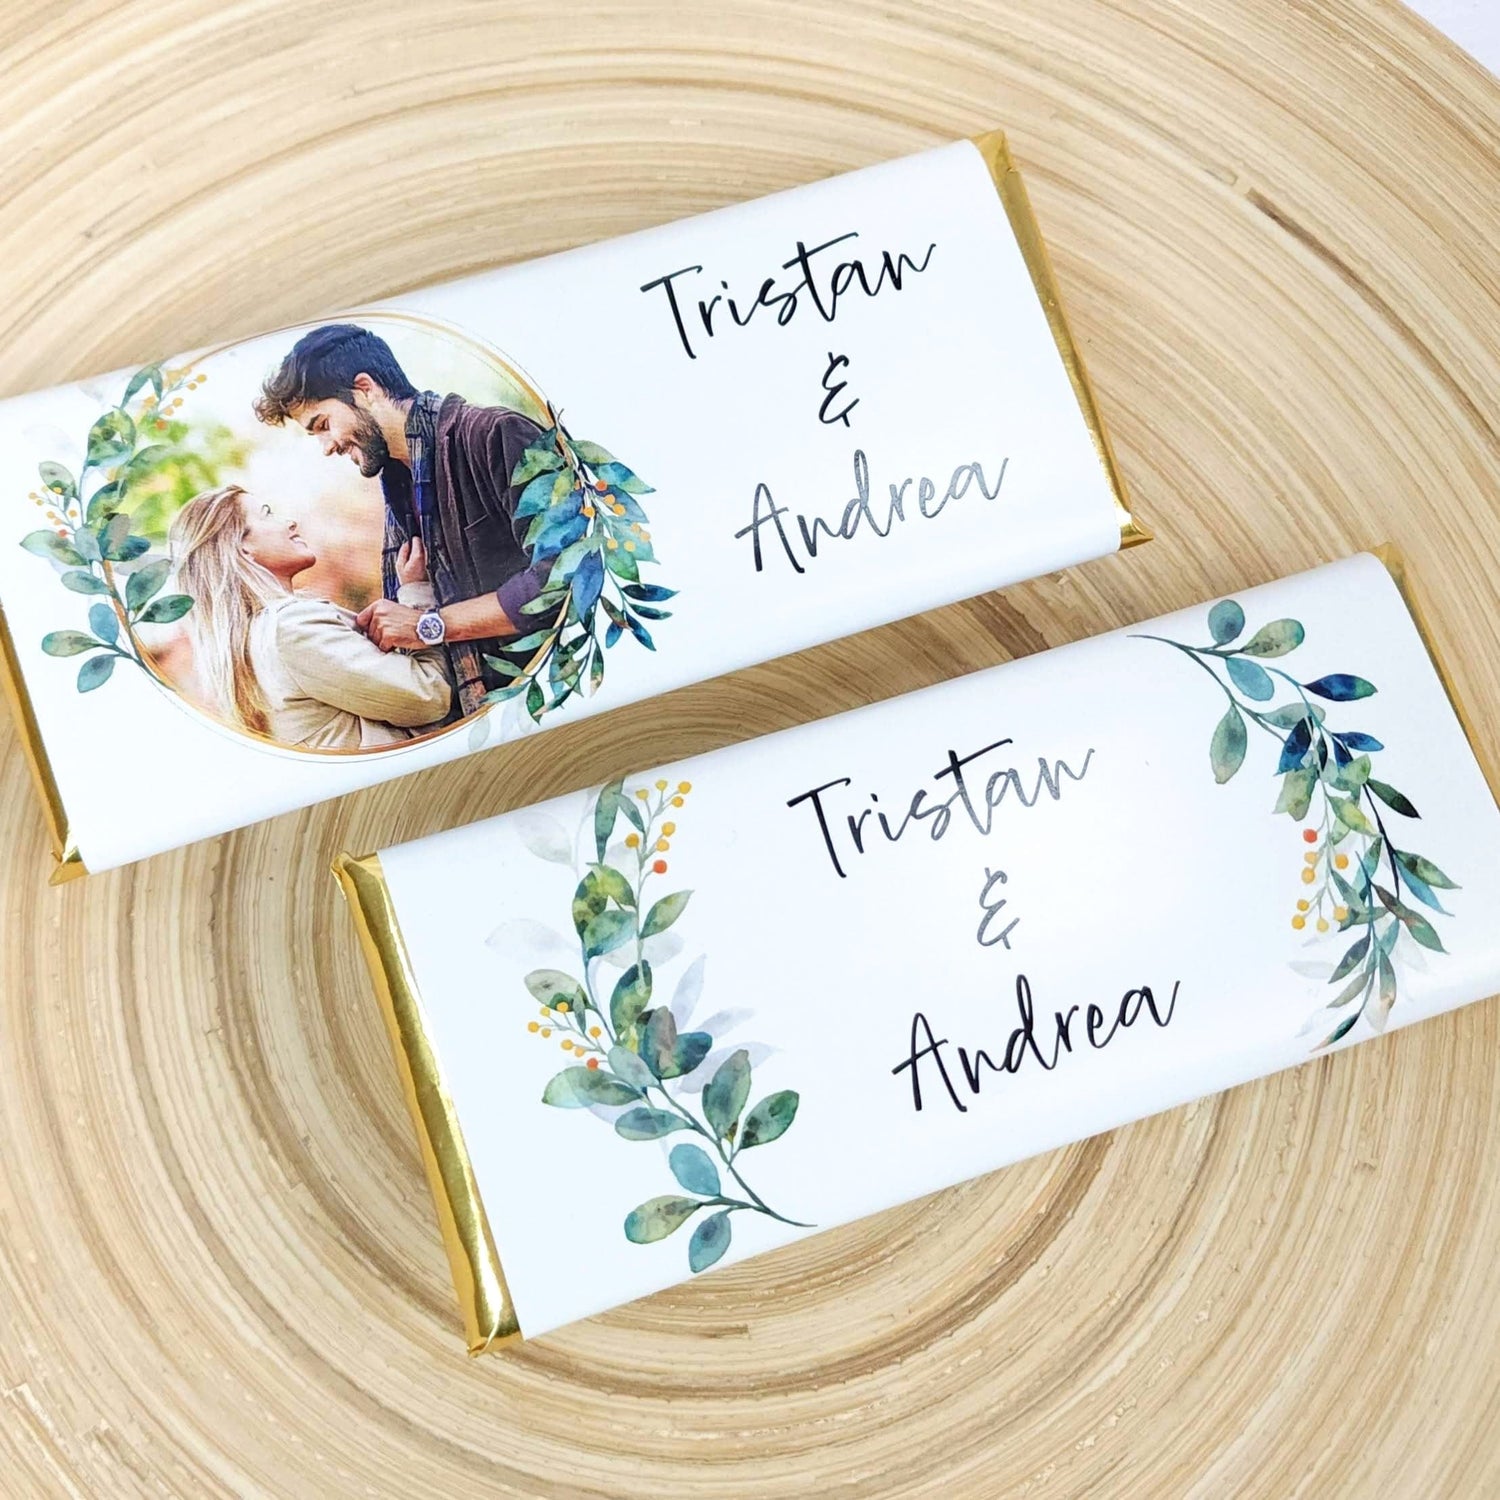 Wedding Floral Photo Frame Candy Bar Wrappers - WA403photo Wedding Photo Candy Bar Wrappers Wedding Favors WA403